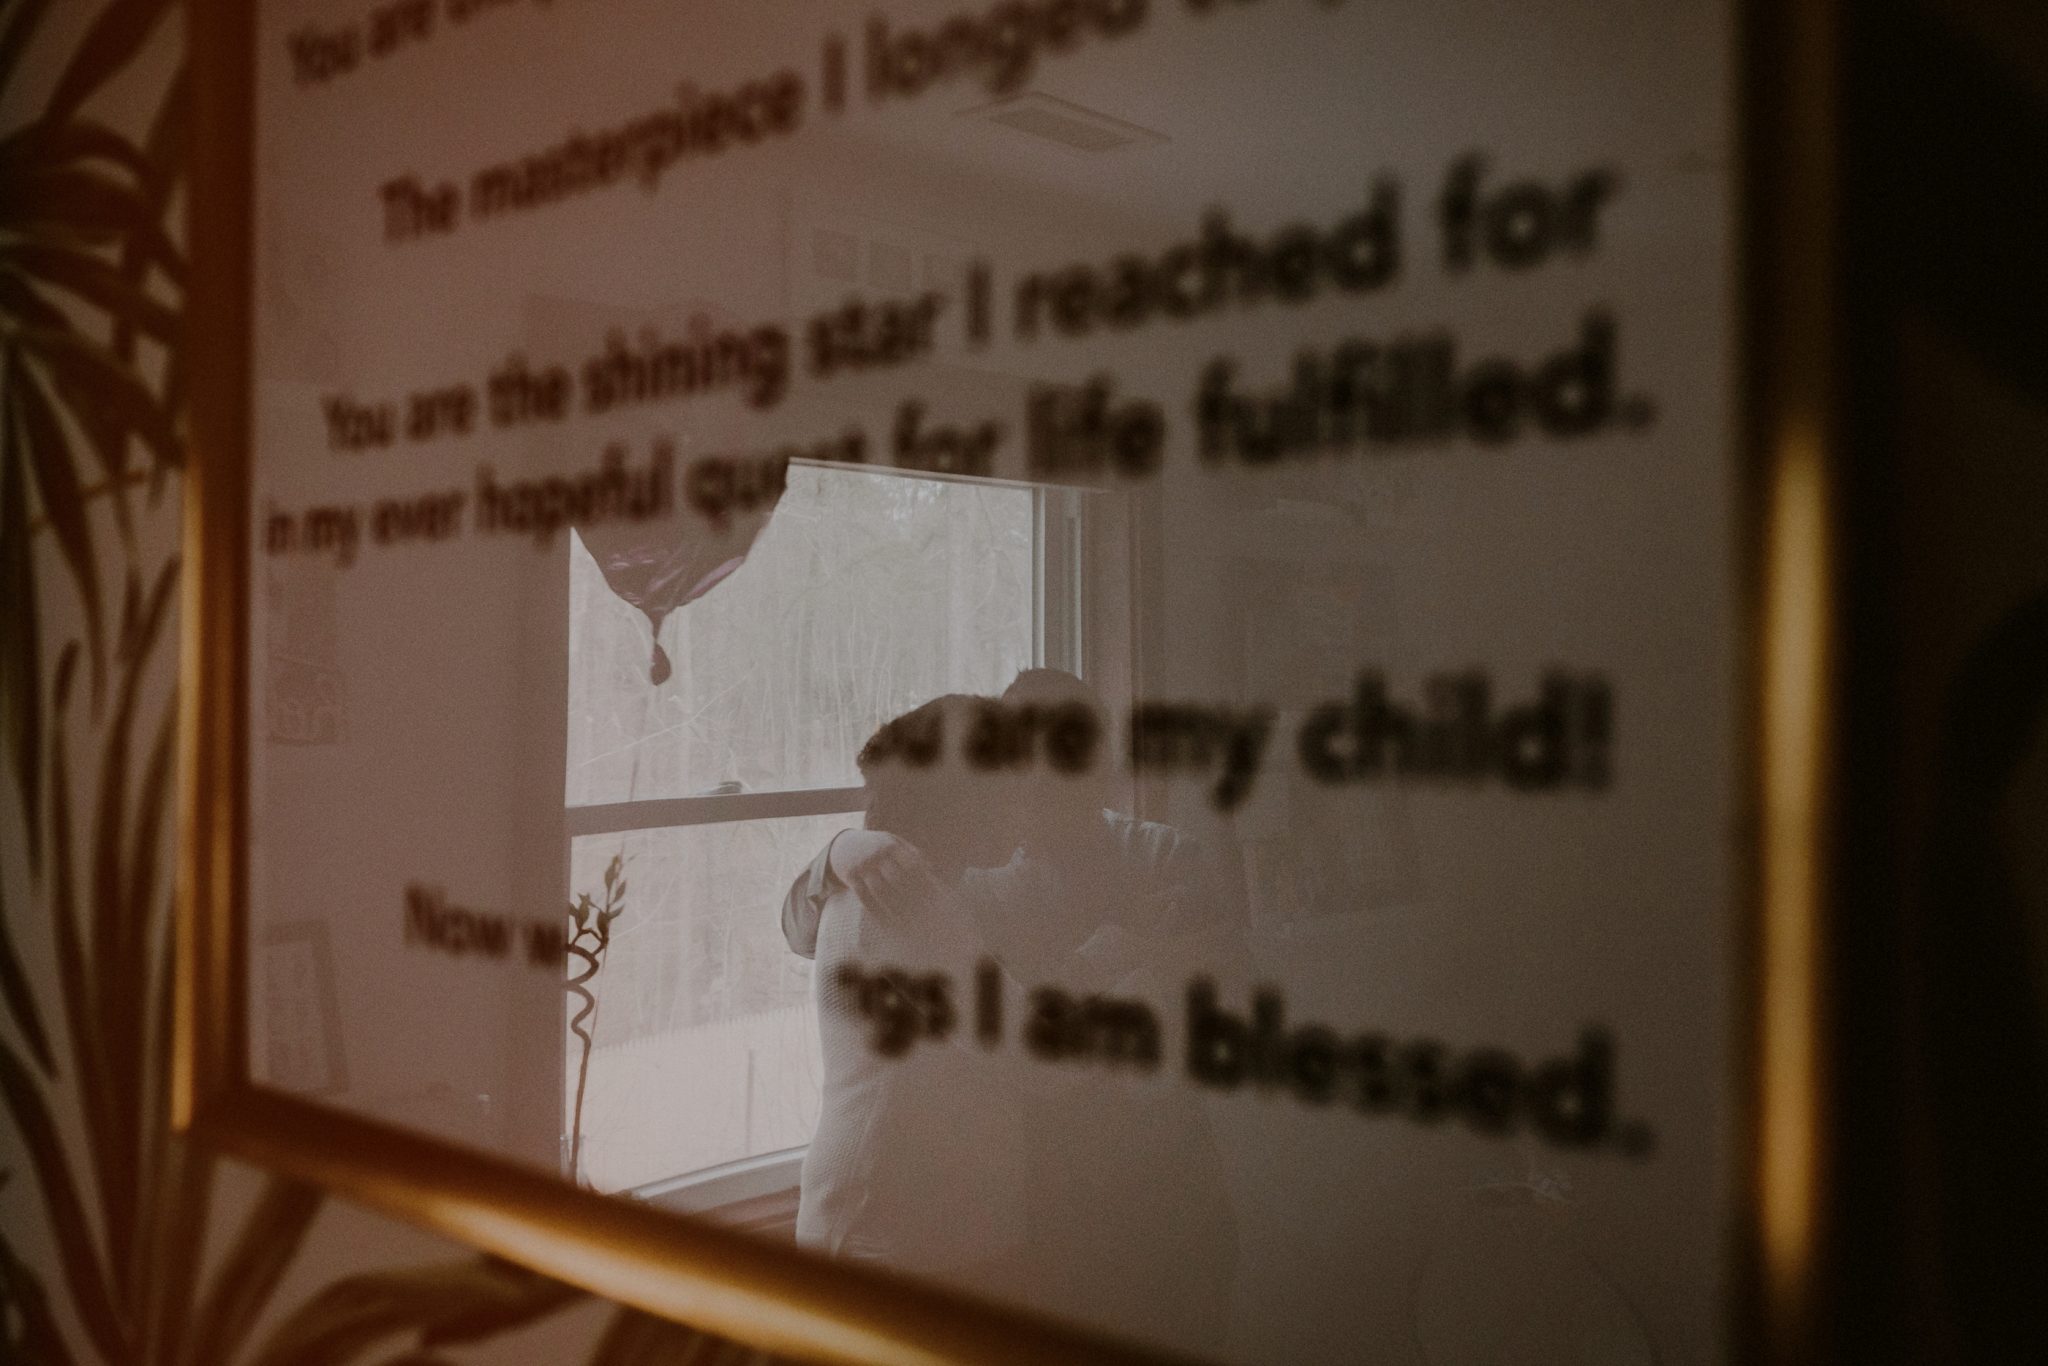 reflection of family portrait seen through biblical quote on framed print on wall